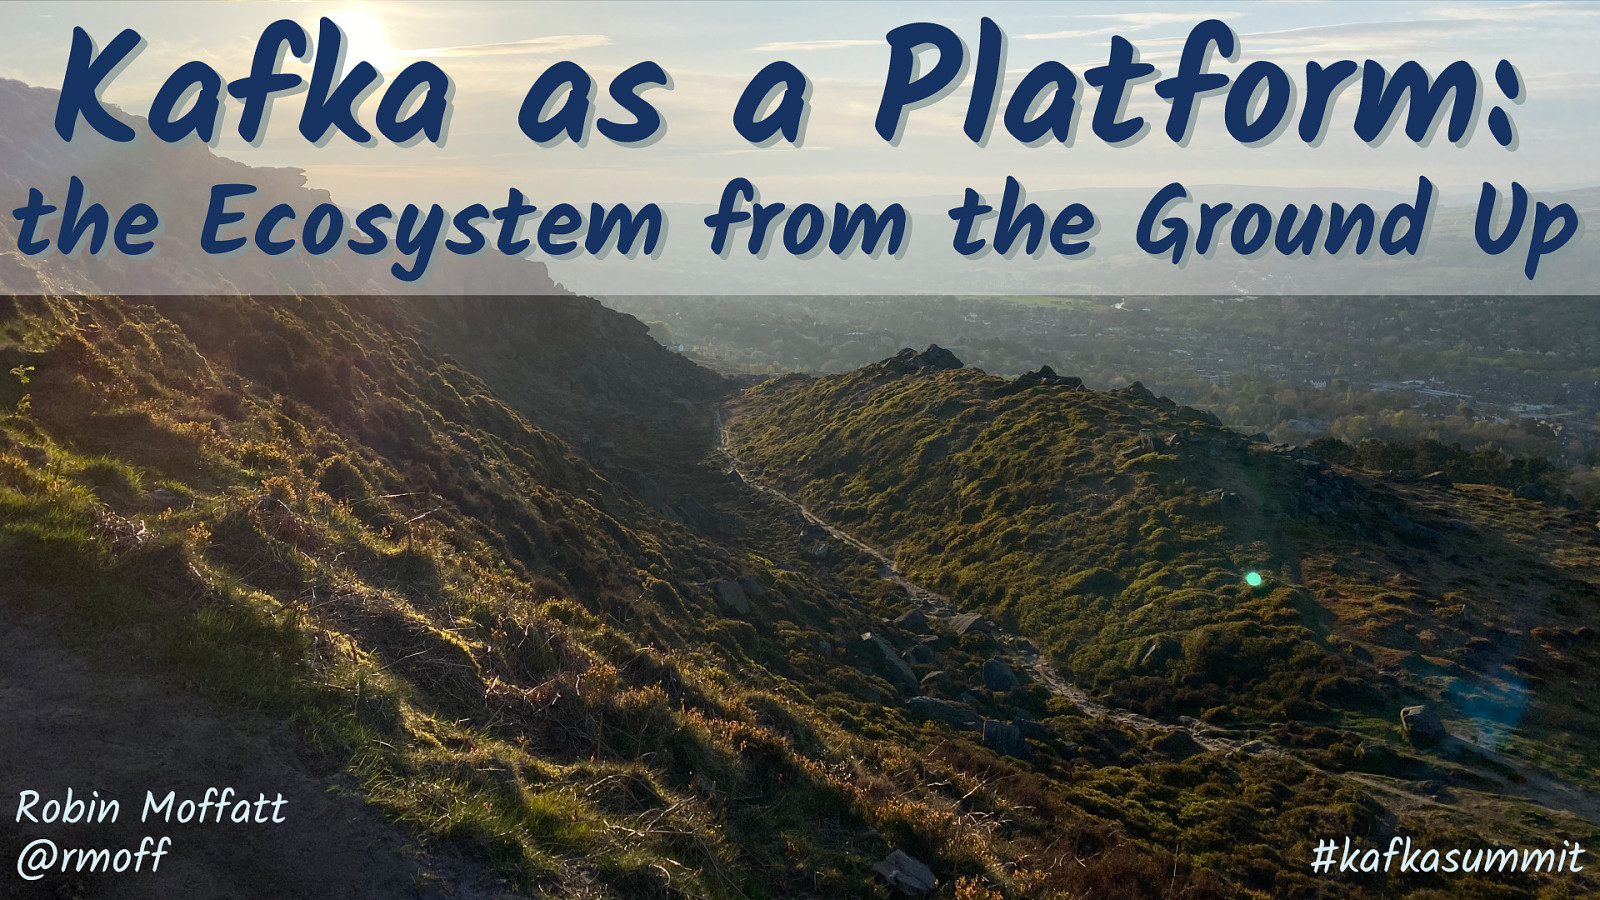 Kafka as a Platform: the Ecosystem from the Ground Up